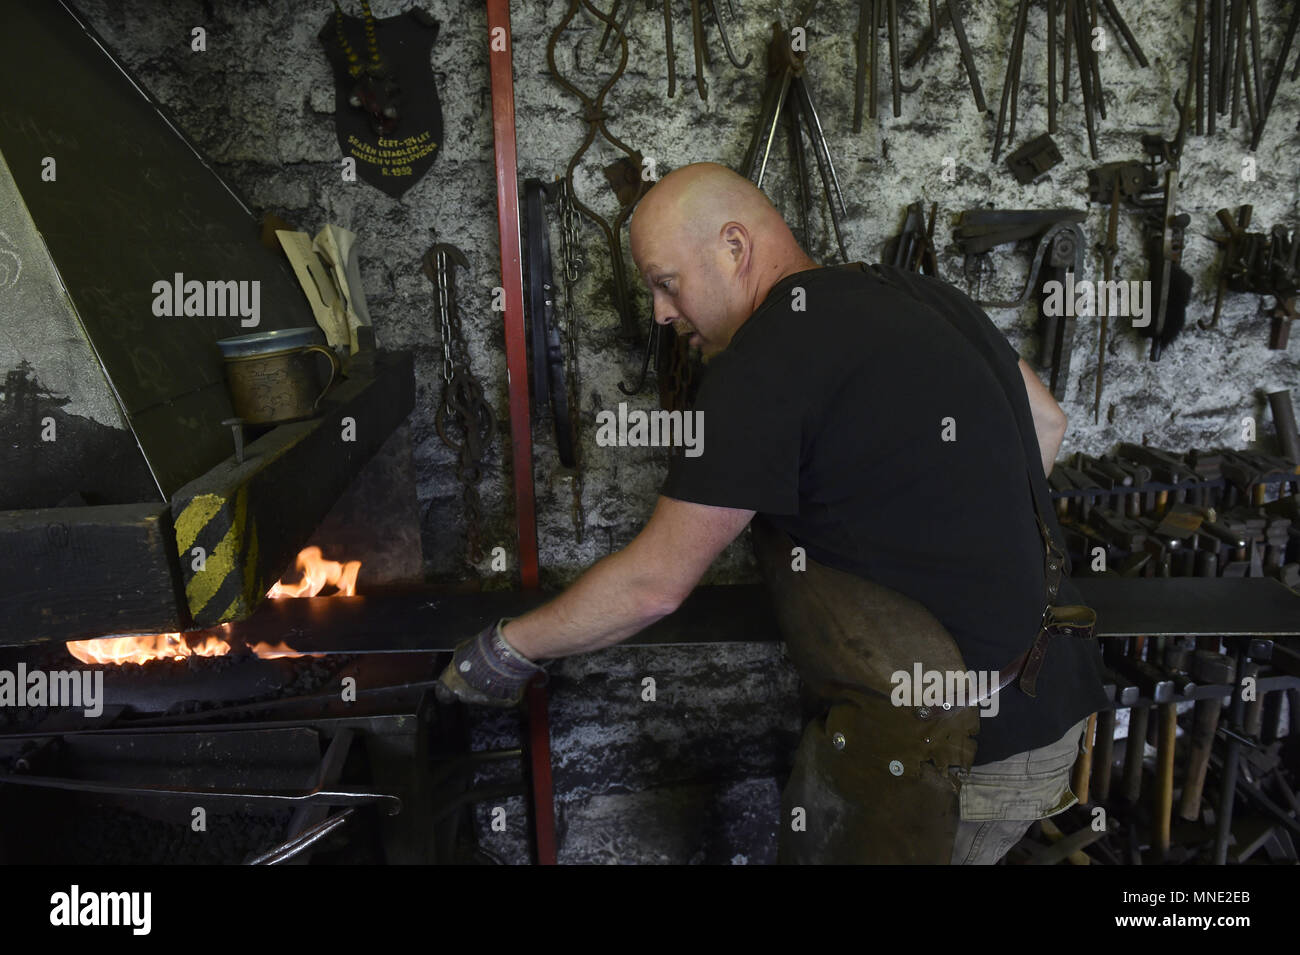 Prerov, Czech Republic. 16th May, 2018. Blacksmith Jiri Jurda makes a four metre high wrought-iron cross on Wednesday, May 16, 2018. The cross will be placed on the Svedske sance hill near Prerov in early June to commemorate a postwar massacre of Carpathian Germans. A ceremonial event including a religious service will traditionally be held on the day of the tragedy on the hill where 267 people were killed shortly after the end of World War Two in June 1945. Credit: Ludek Perina/CTK Photo/Alamy Live News Stock Photo